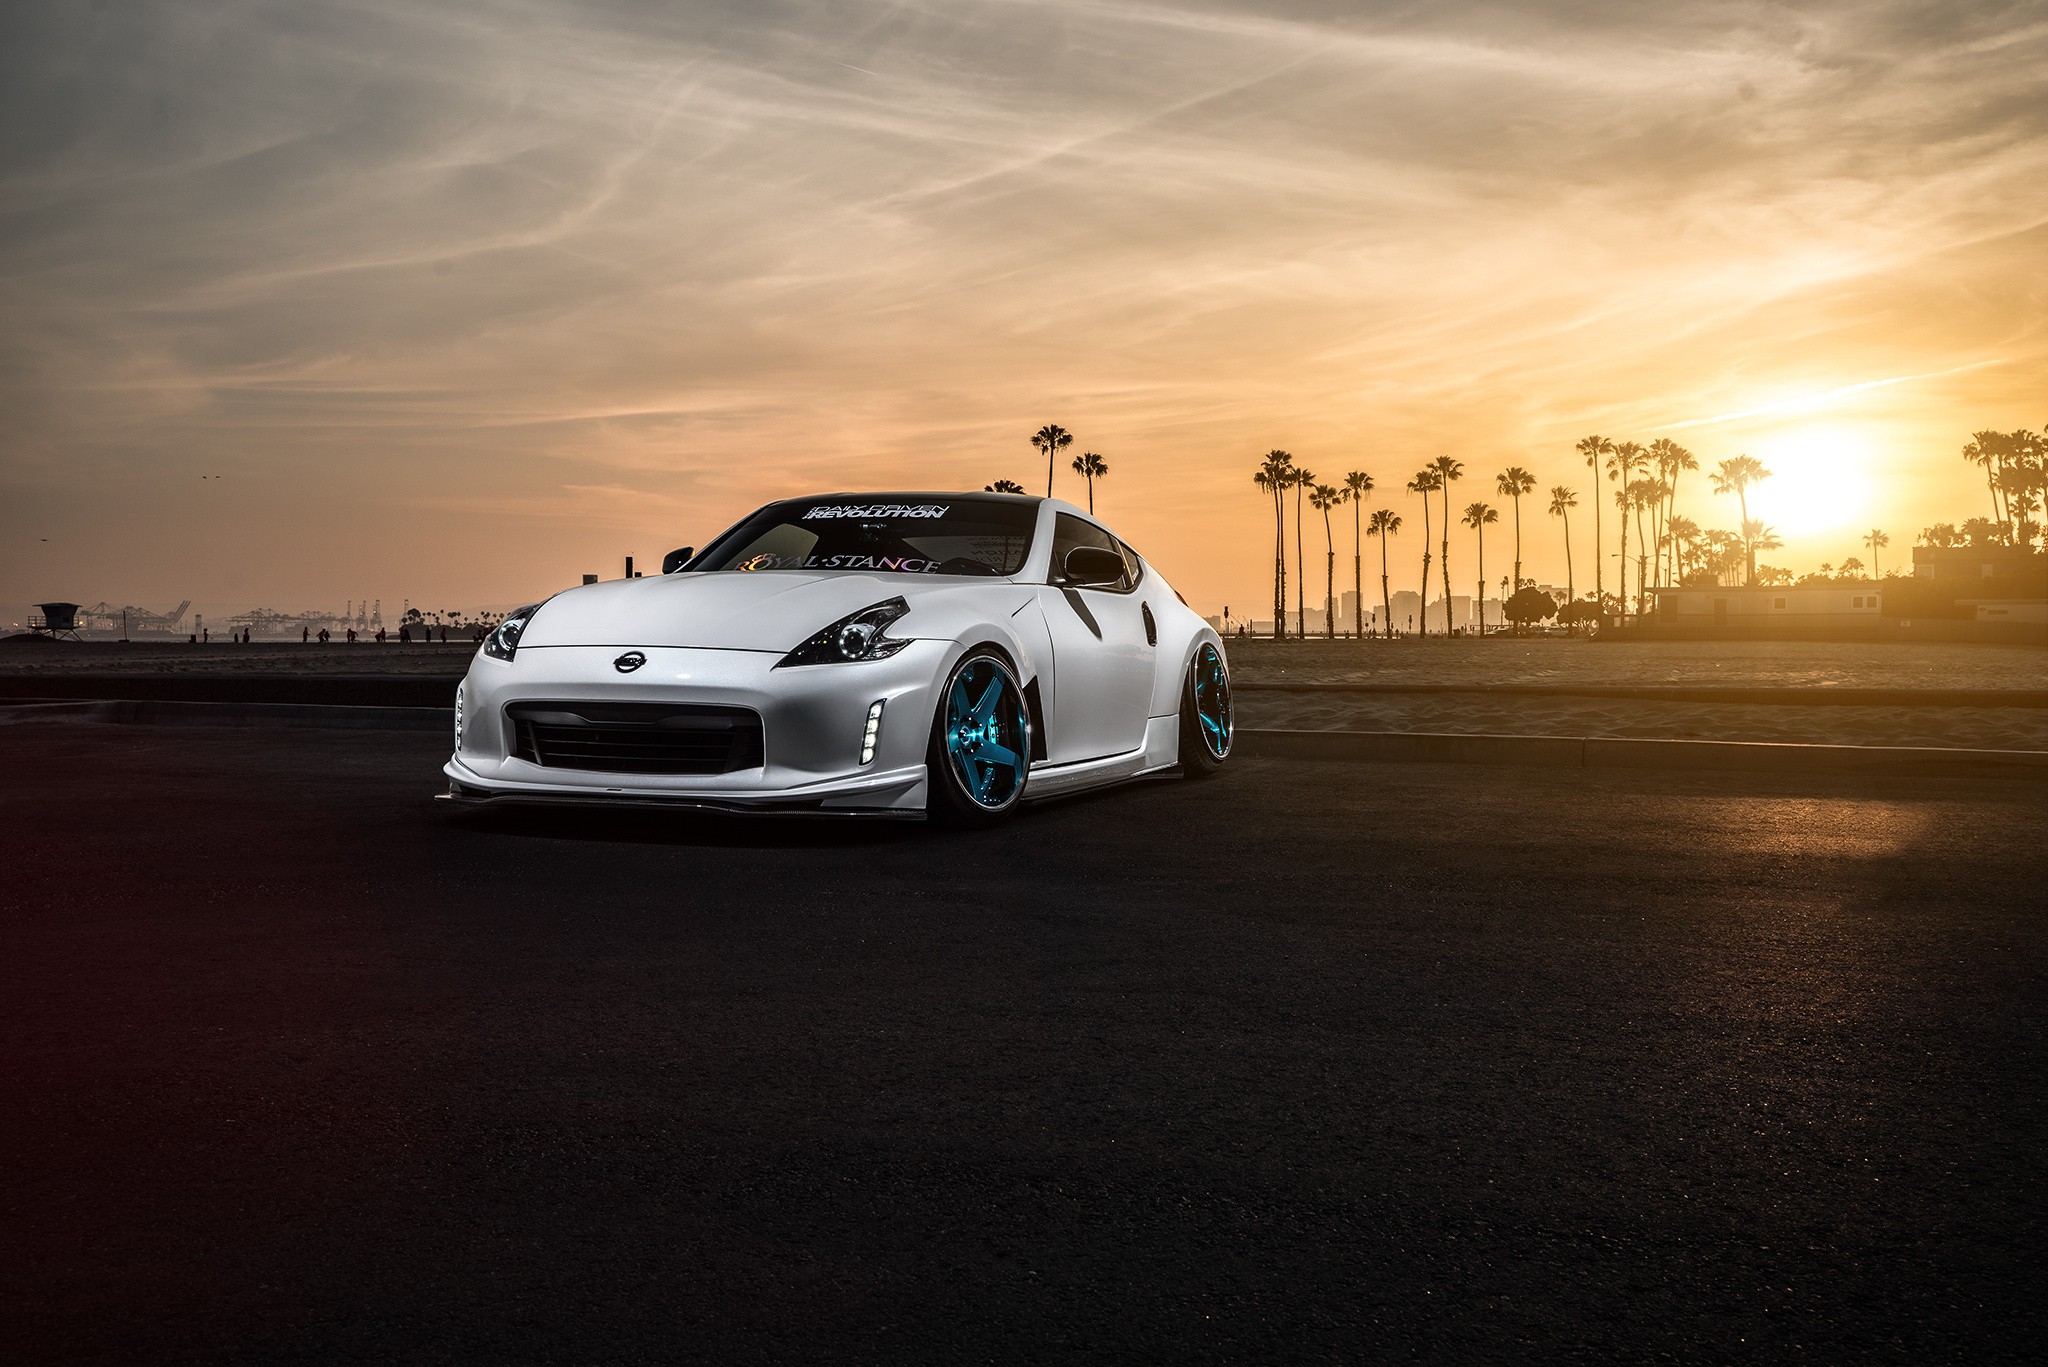 General 2048x1367 Nissan car stance (cars) sunlight palm trees tuning colored wheels negative camber stanced Nissan Fairlady Z Nissan 370Z silver cars 500px sky